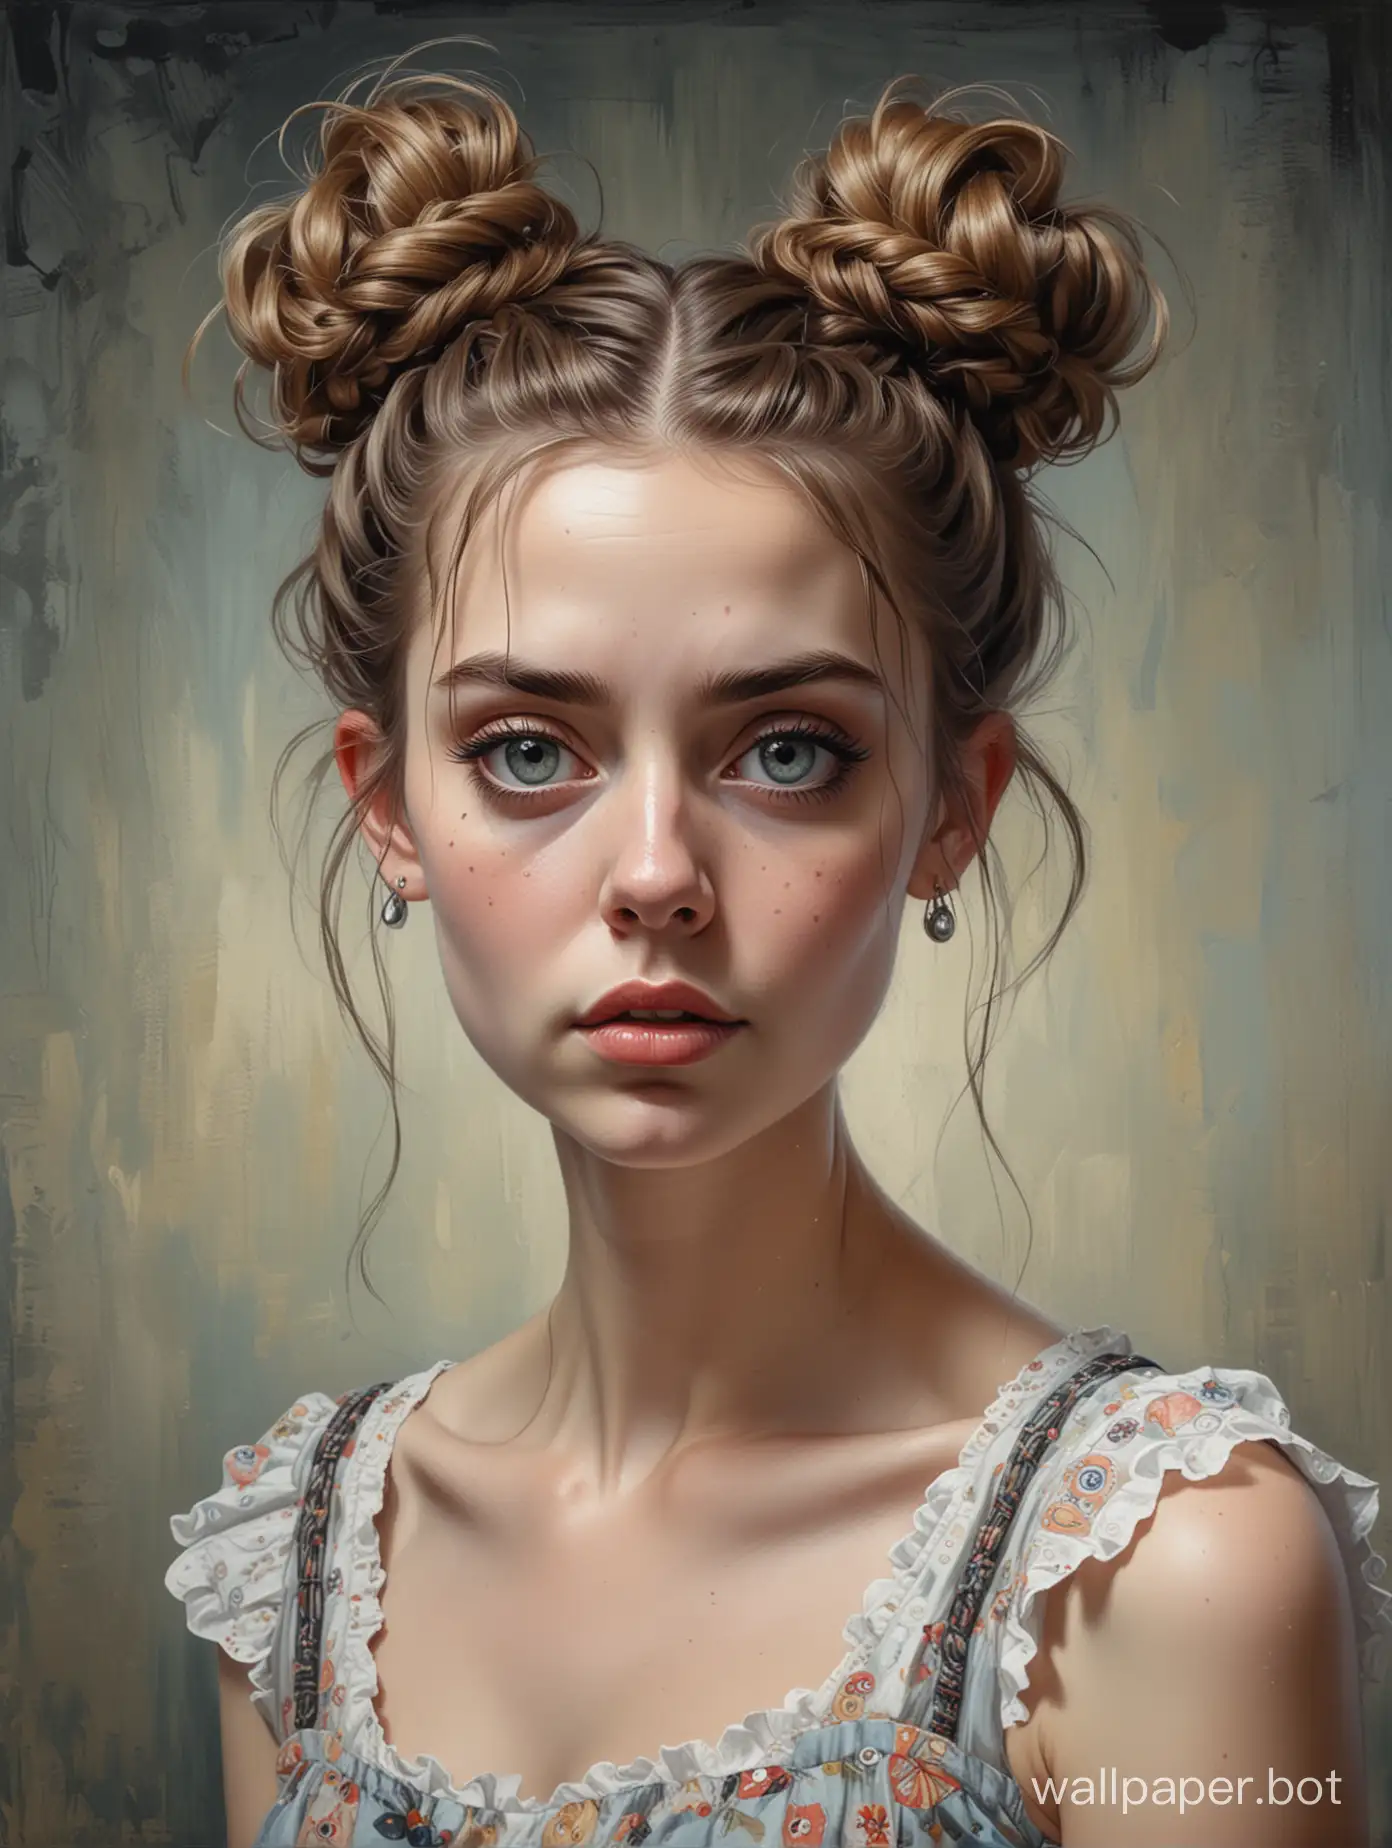 Eccentric-Girl-with-Expressive-Eyes-Surreal-Comic-Style-Oil-Painting-by-Tim-Burton